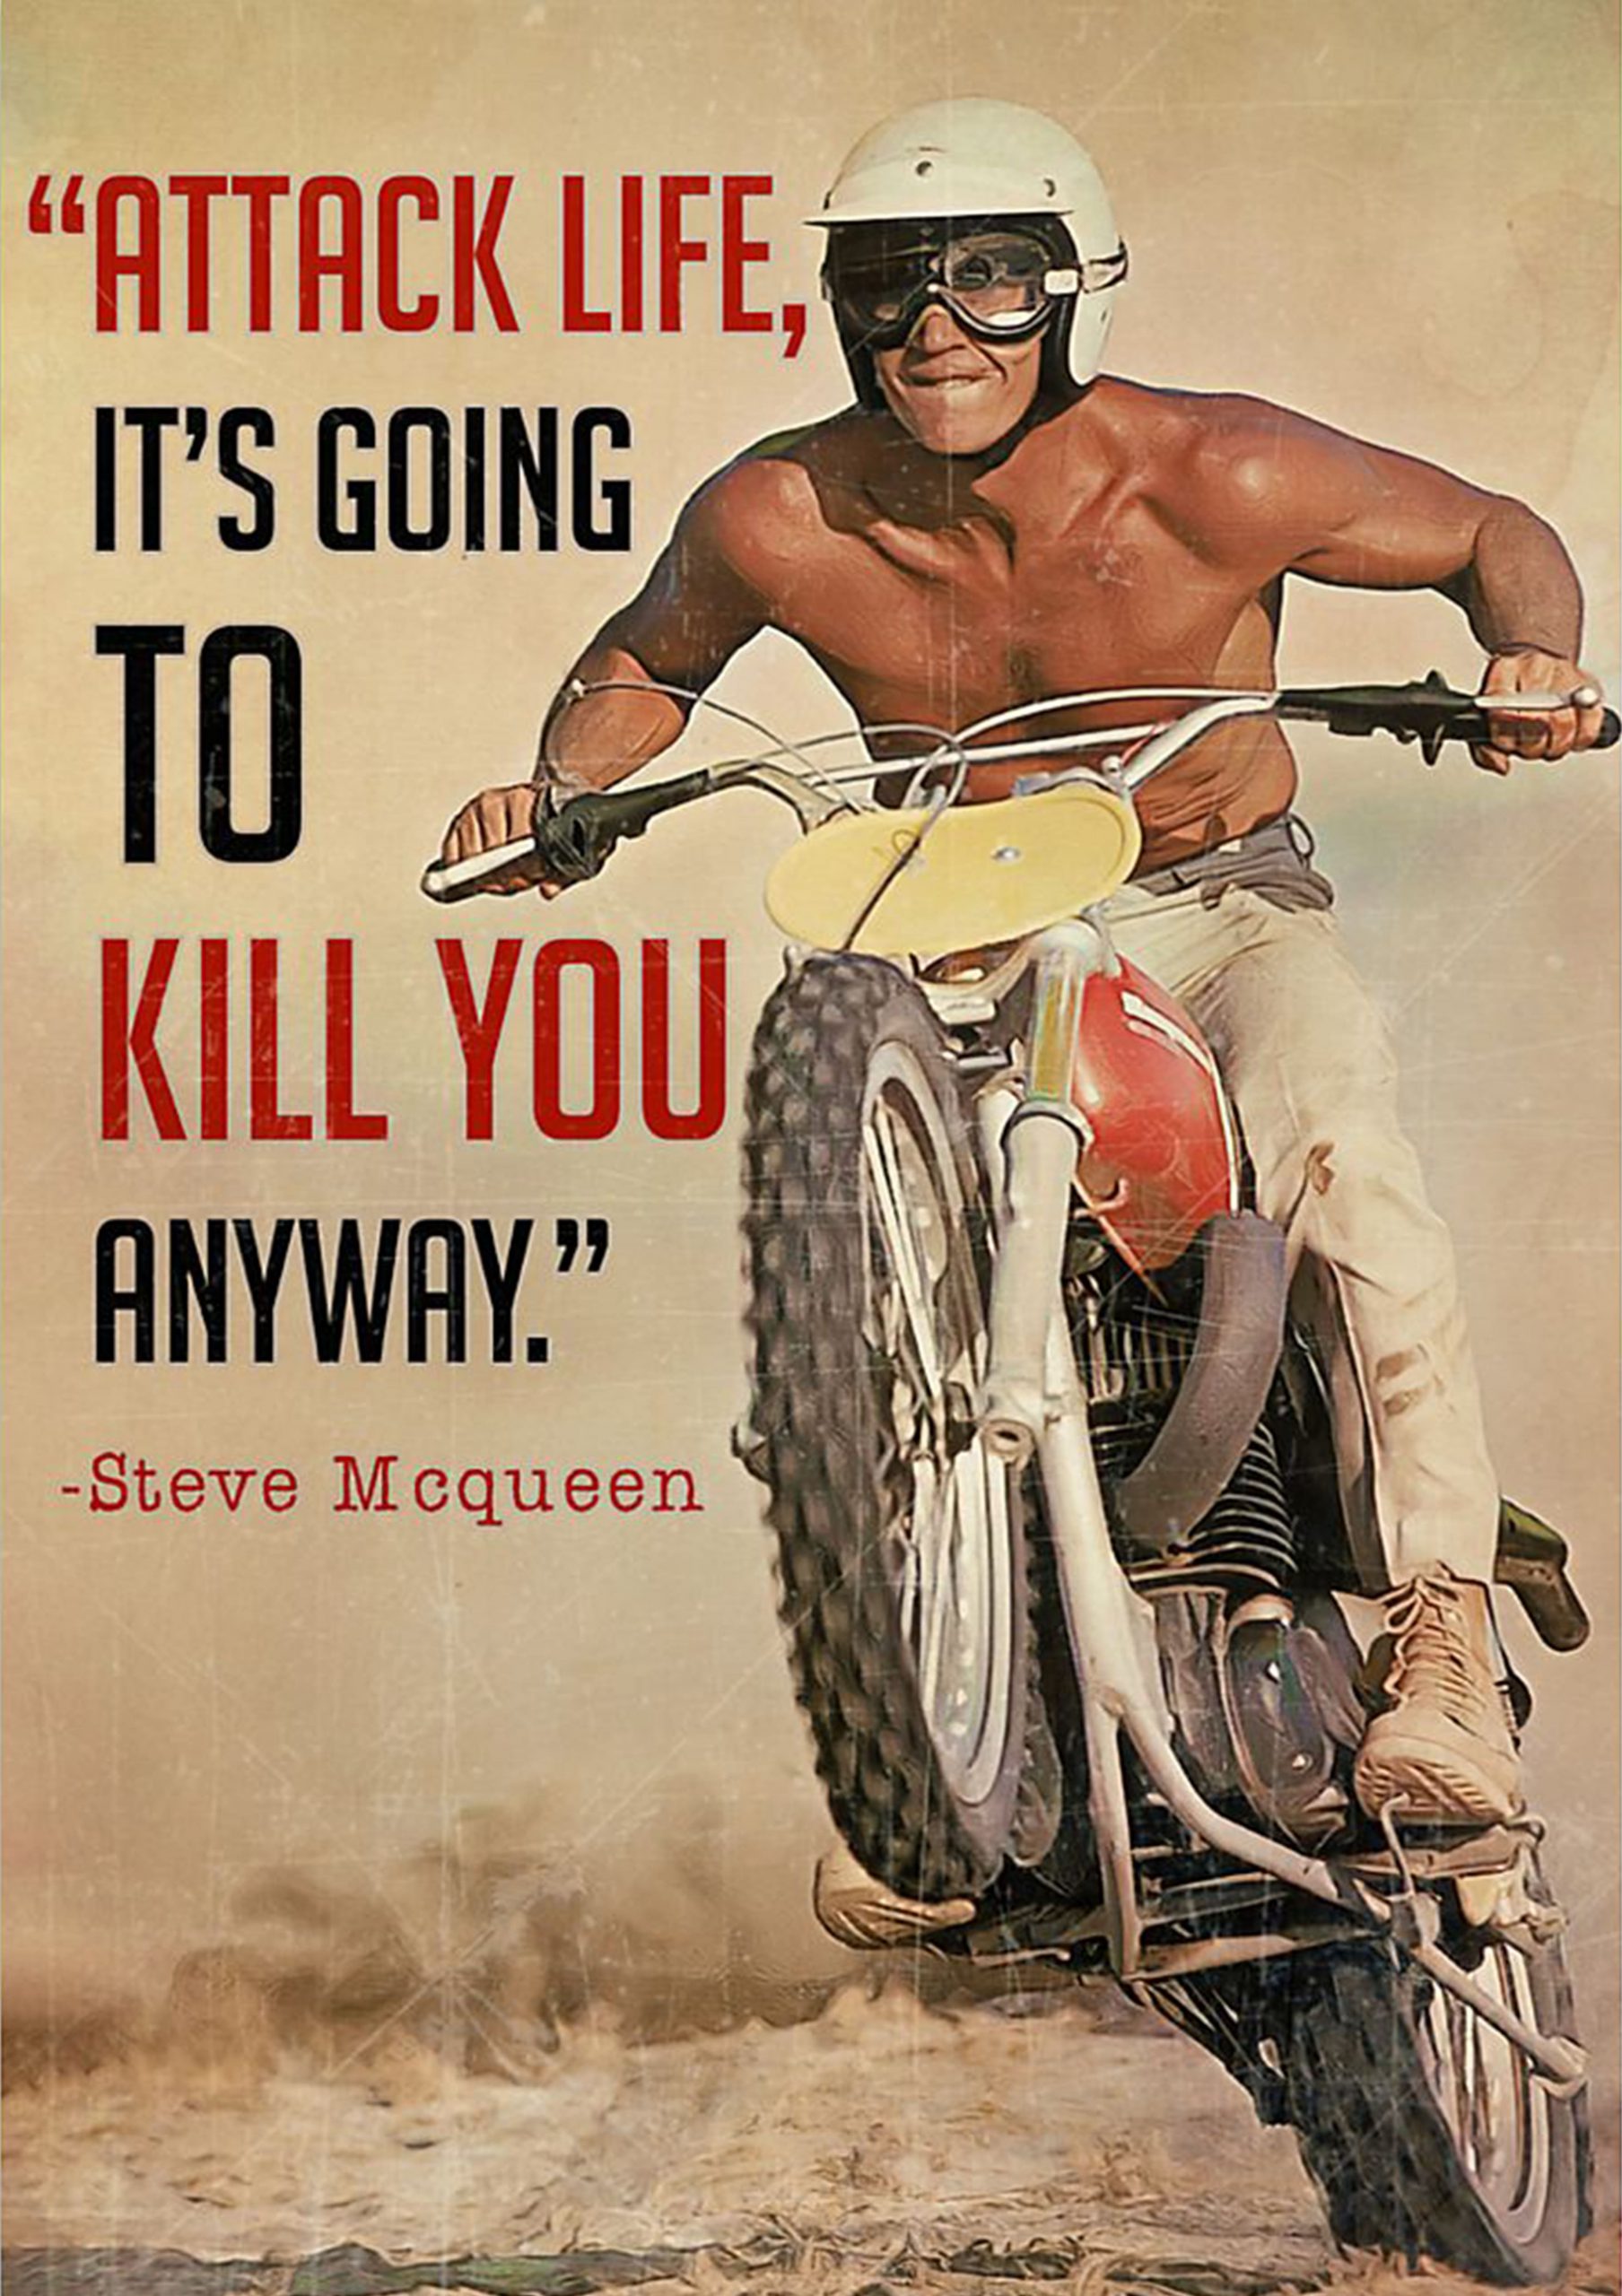 vintage attack life its going to kill you anyway poster 1